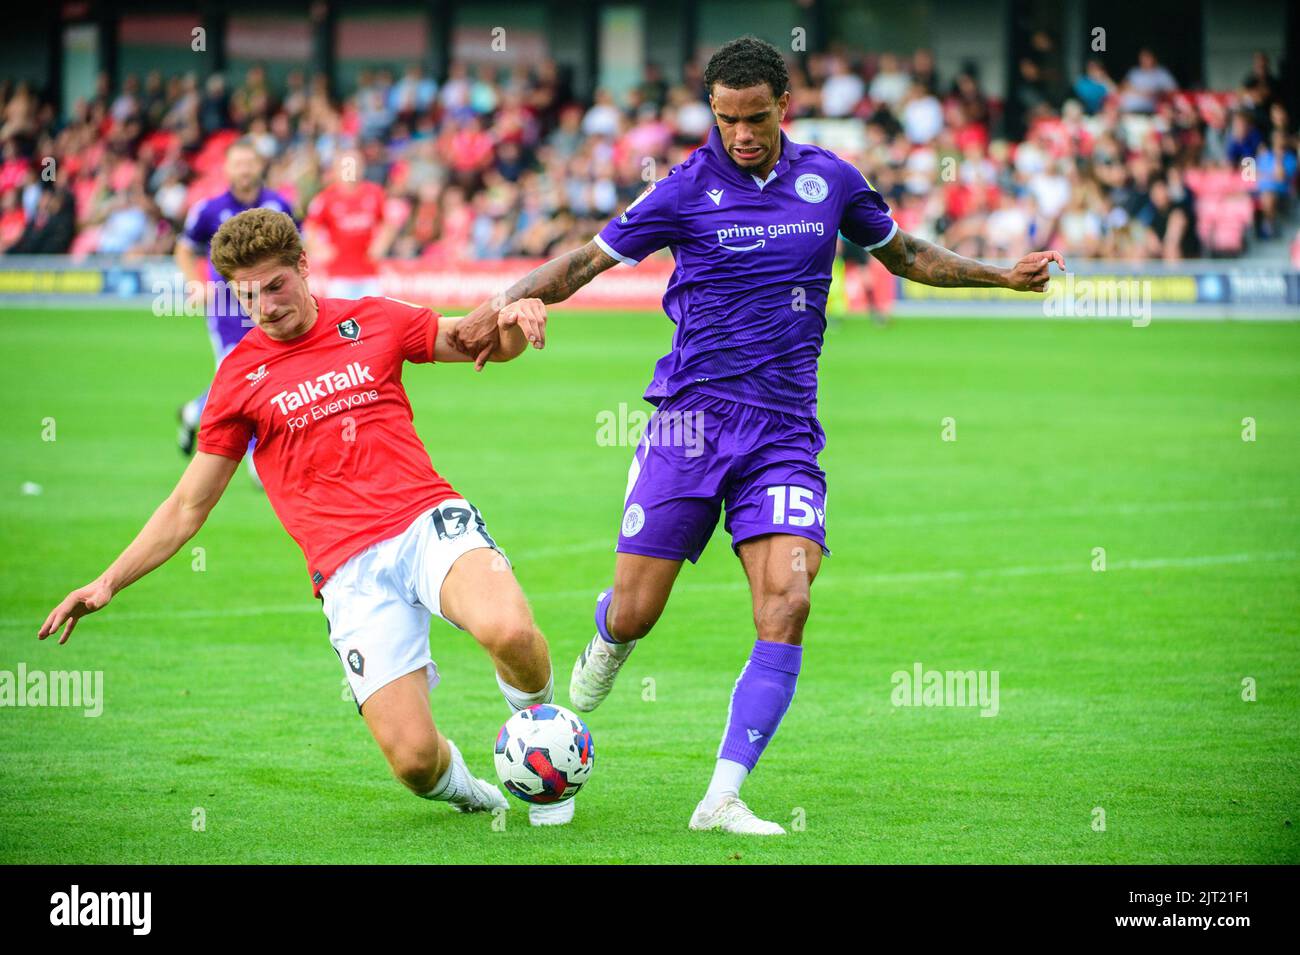 Lorent Tolaj of Salford City tackles Terence Vancooten of Stevenage FC during the Sky Bet League 2 match between Salford City and Stevenage at Moor Lane, Salford on Saturday 27th August 2022. (Credit: Ian Charles | MI News) Credit: MI News & Sport /Alamy Live News Stock Photo